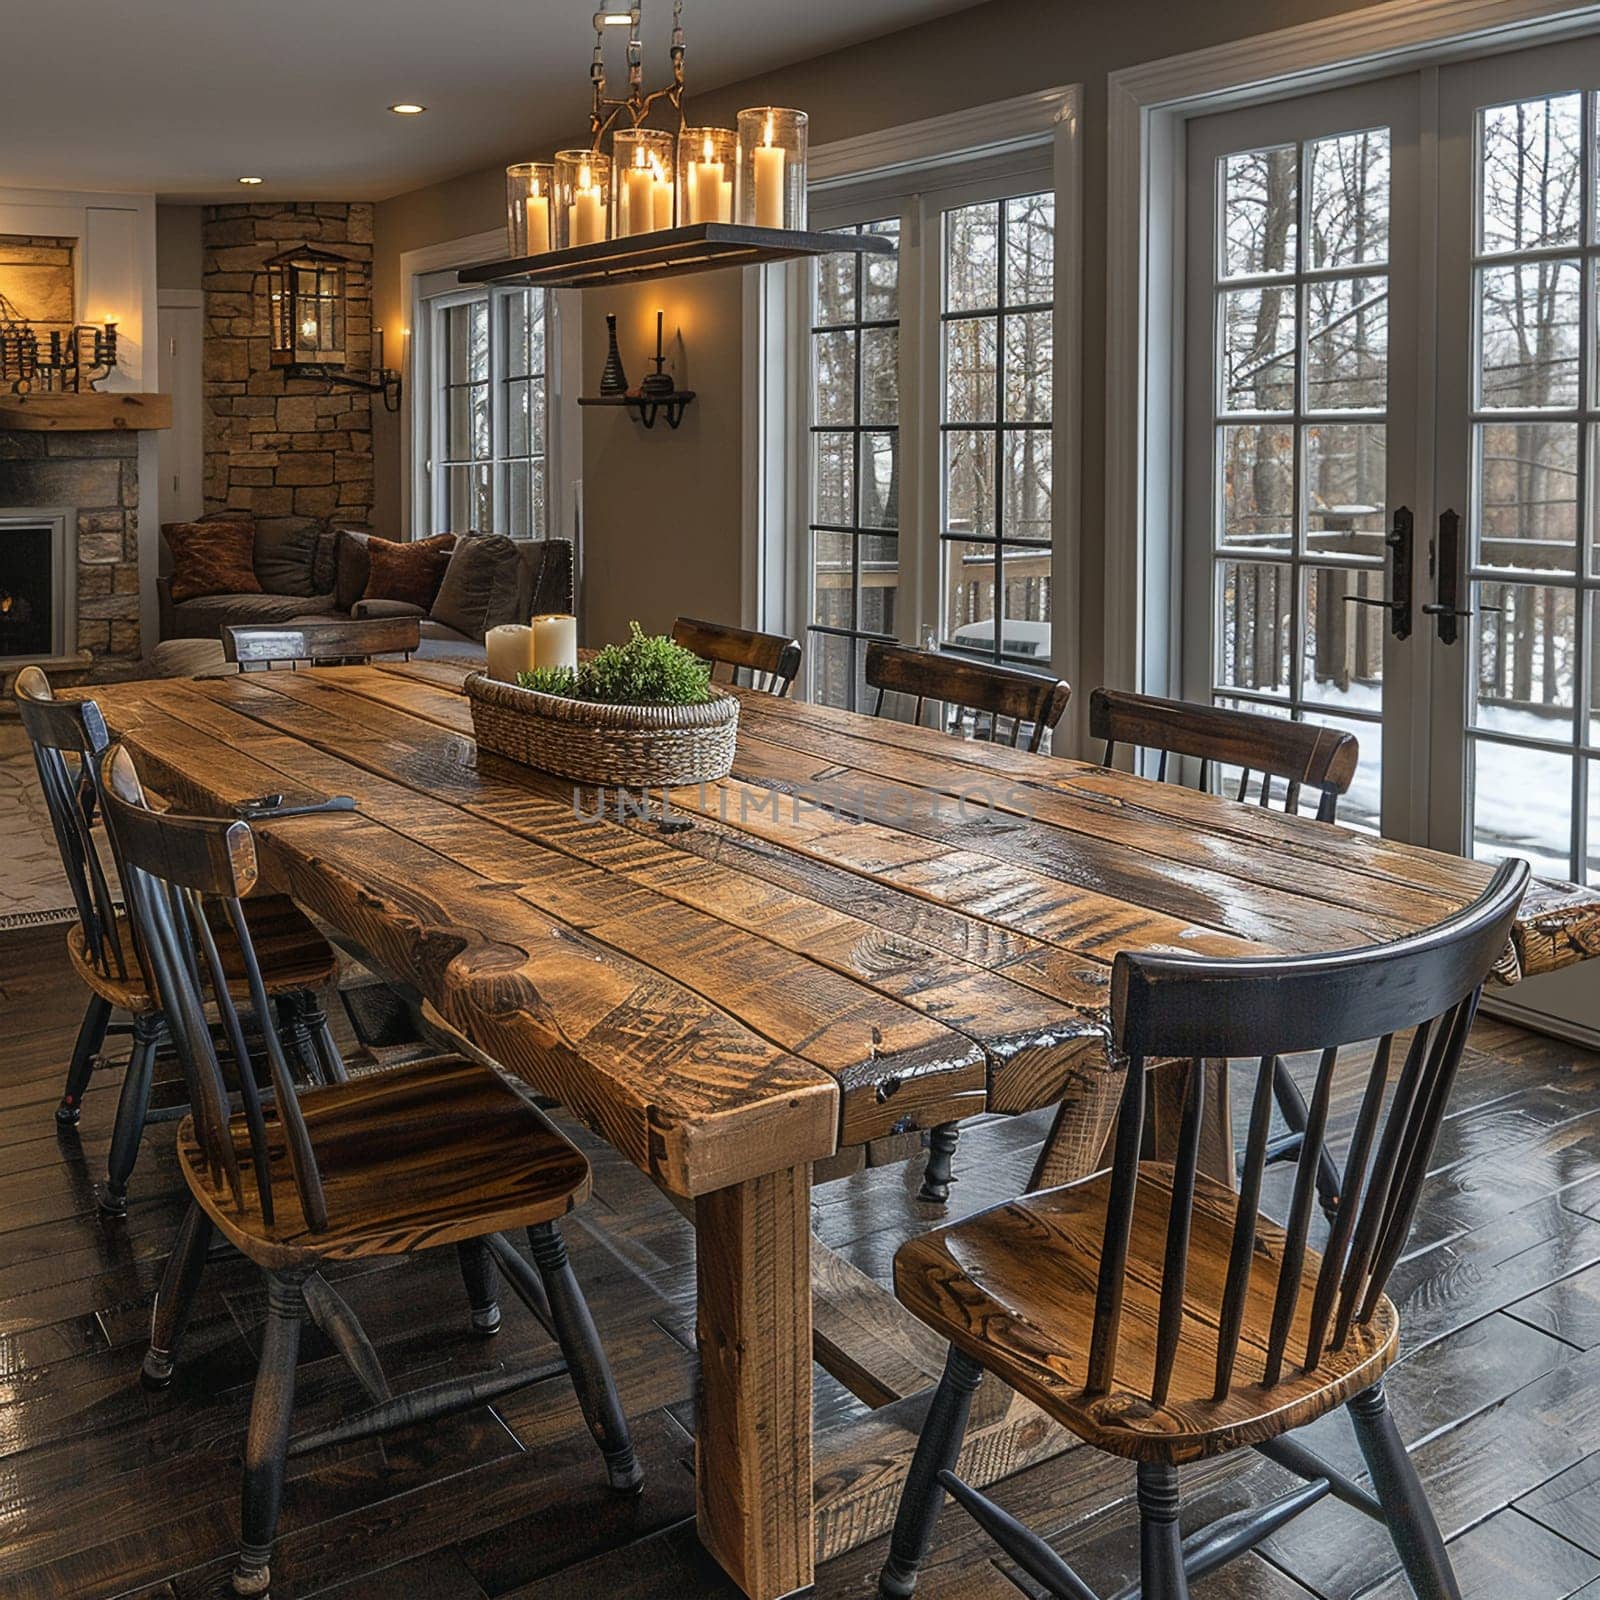 Warm and inviting dining room with a rustic farmhouse table and candle chandelier8K